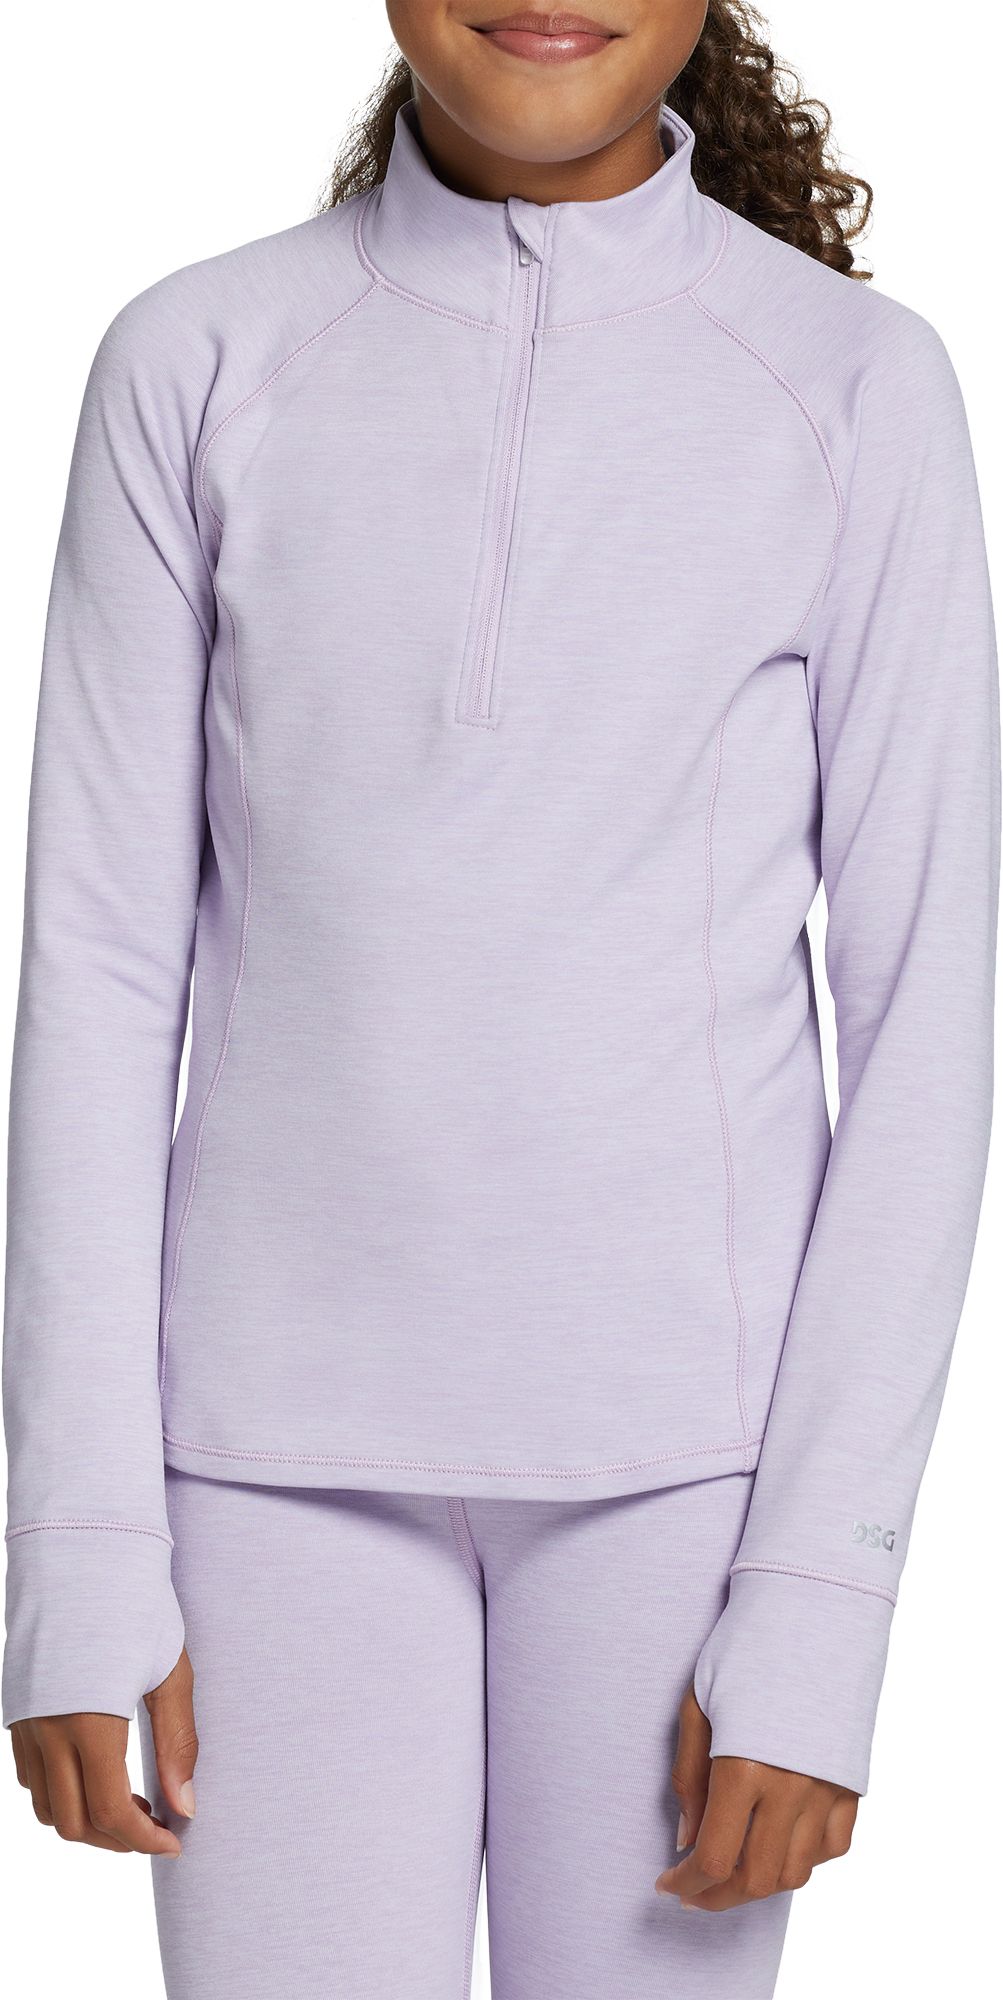 DSG Girls Cold Weather 1/4 Zip Pullover